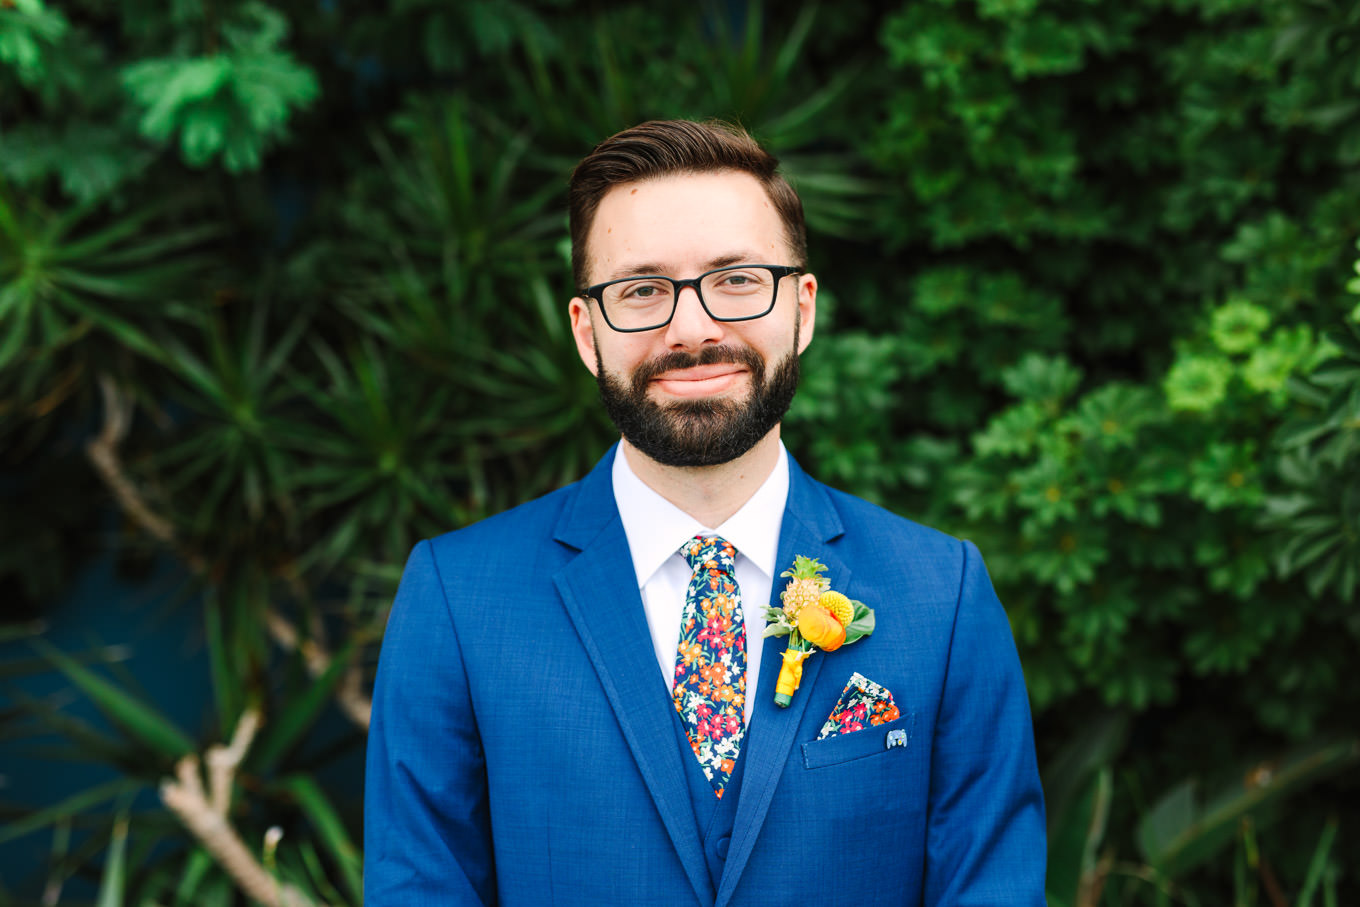 Groom in glasses, floral tie, and bright blue suit | Colorful Downtown Los Angeles Valentine Wedding | Los Angeles wedding photographer | #losangeleswedding #colorfulwedding #DTLA #valentinedtla   Source: Mary Costa Photography | Los Angeles